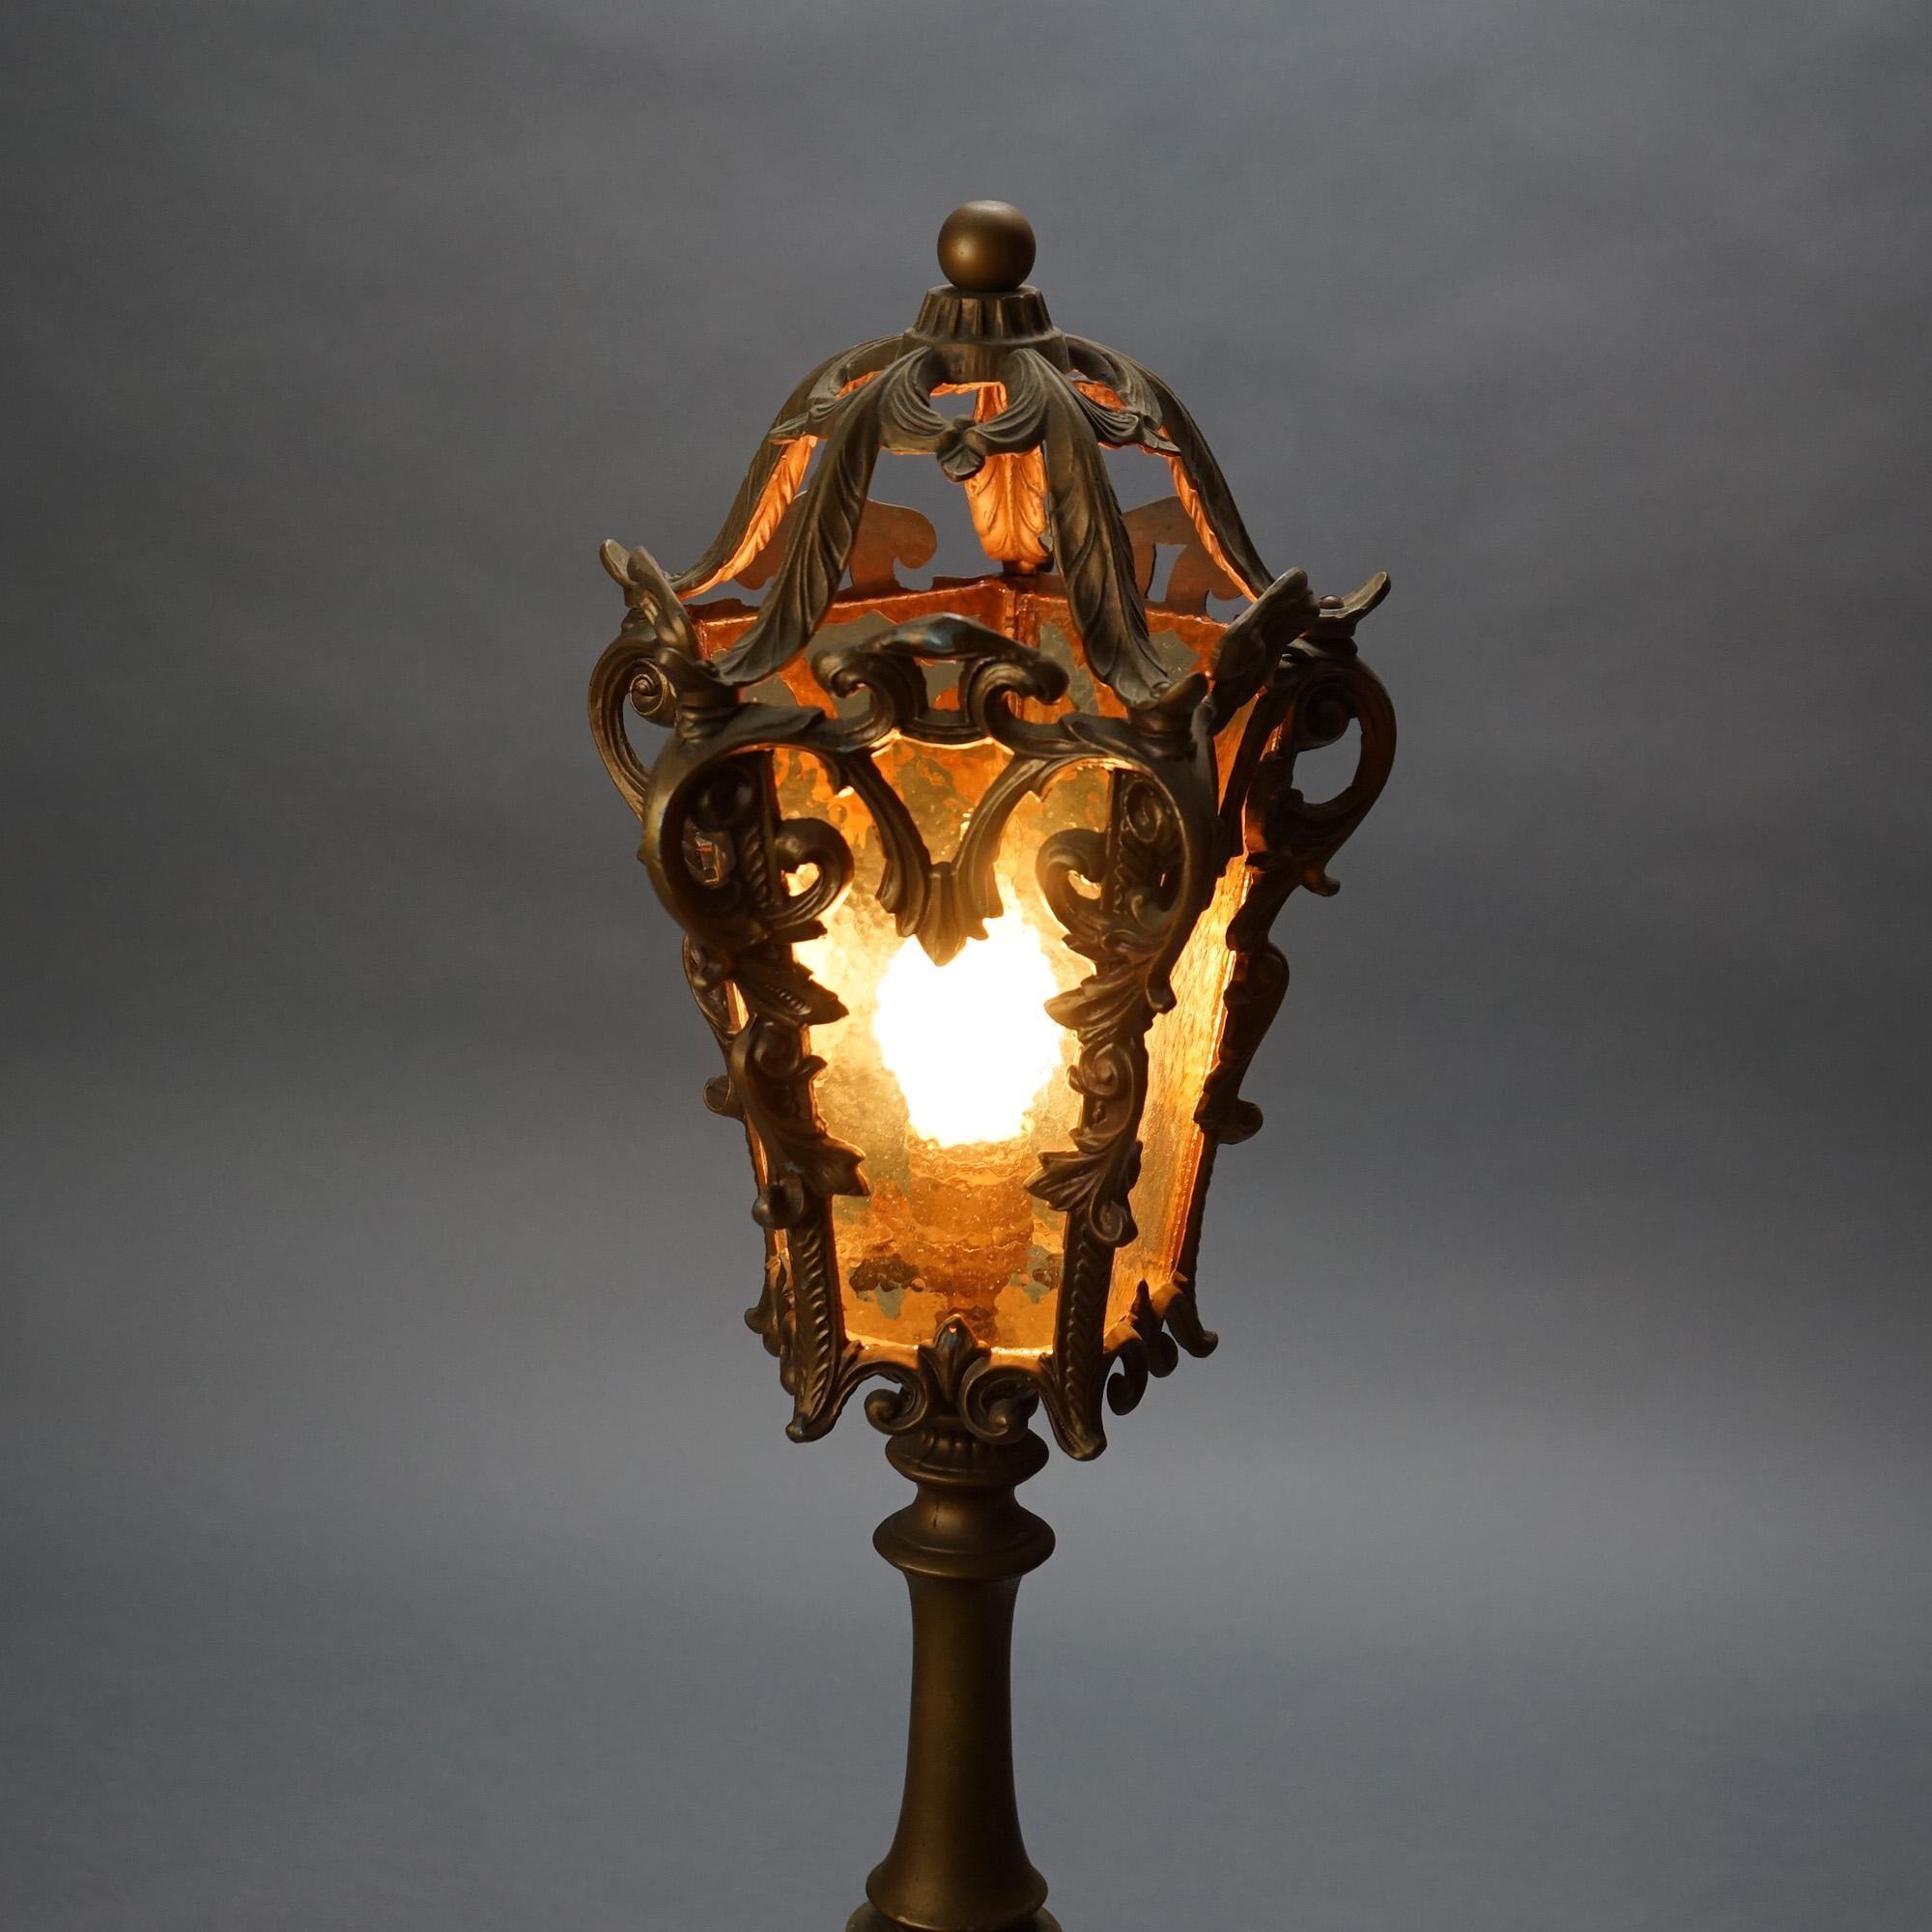 Antique Arts & Crafts Hammered Amber Glass Torchiere Table Lamp in the Street Lantern Form with Foliate Elements and Marble Base C1920

Measures - 27.5